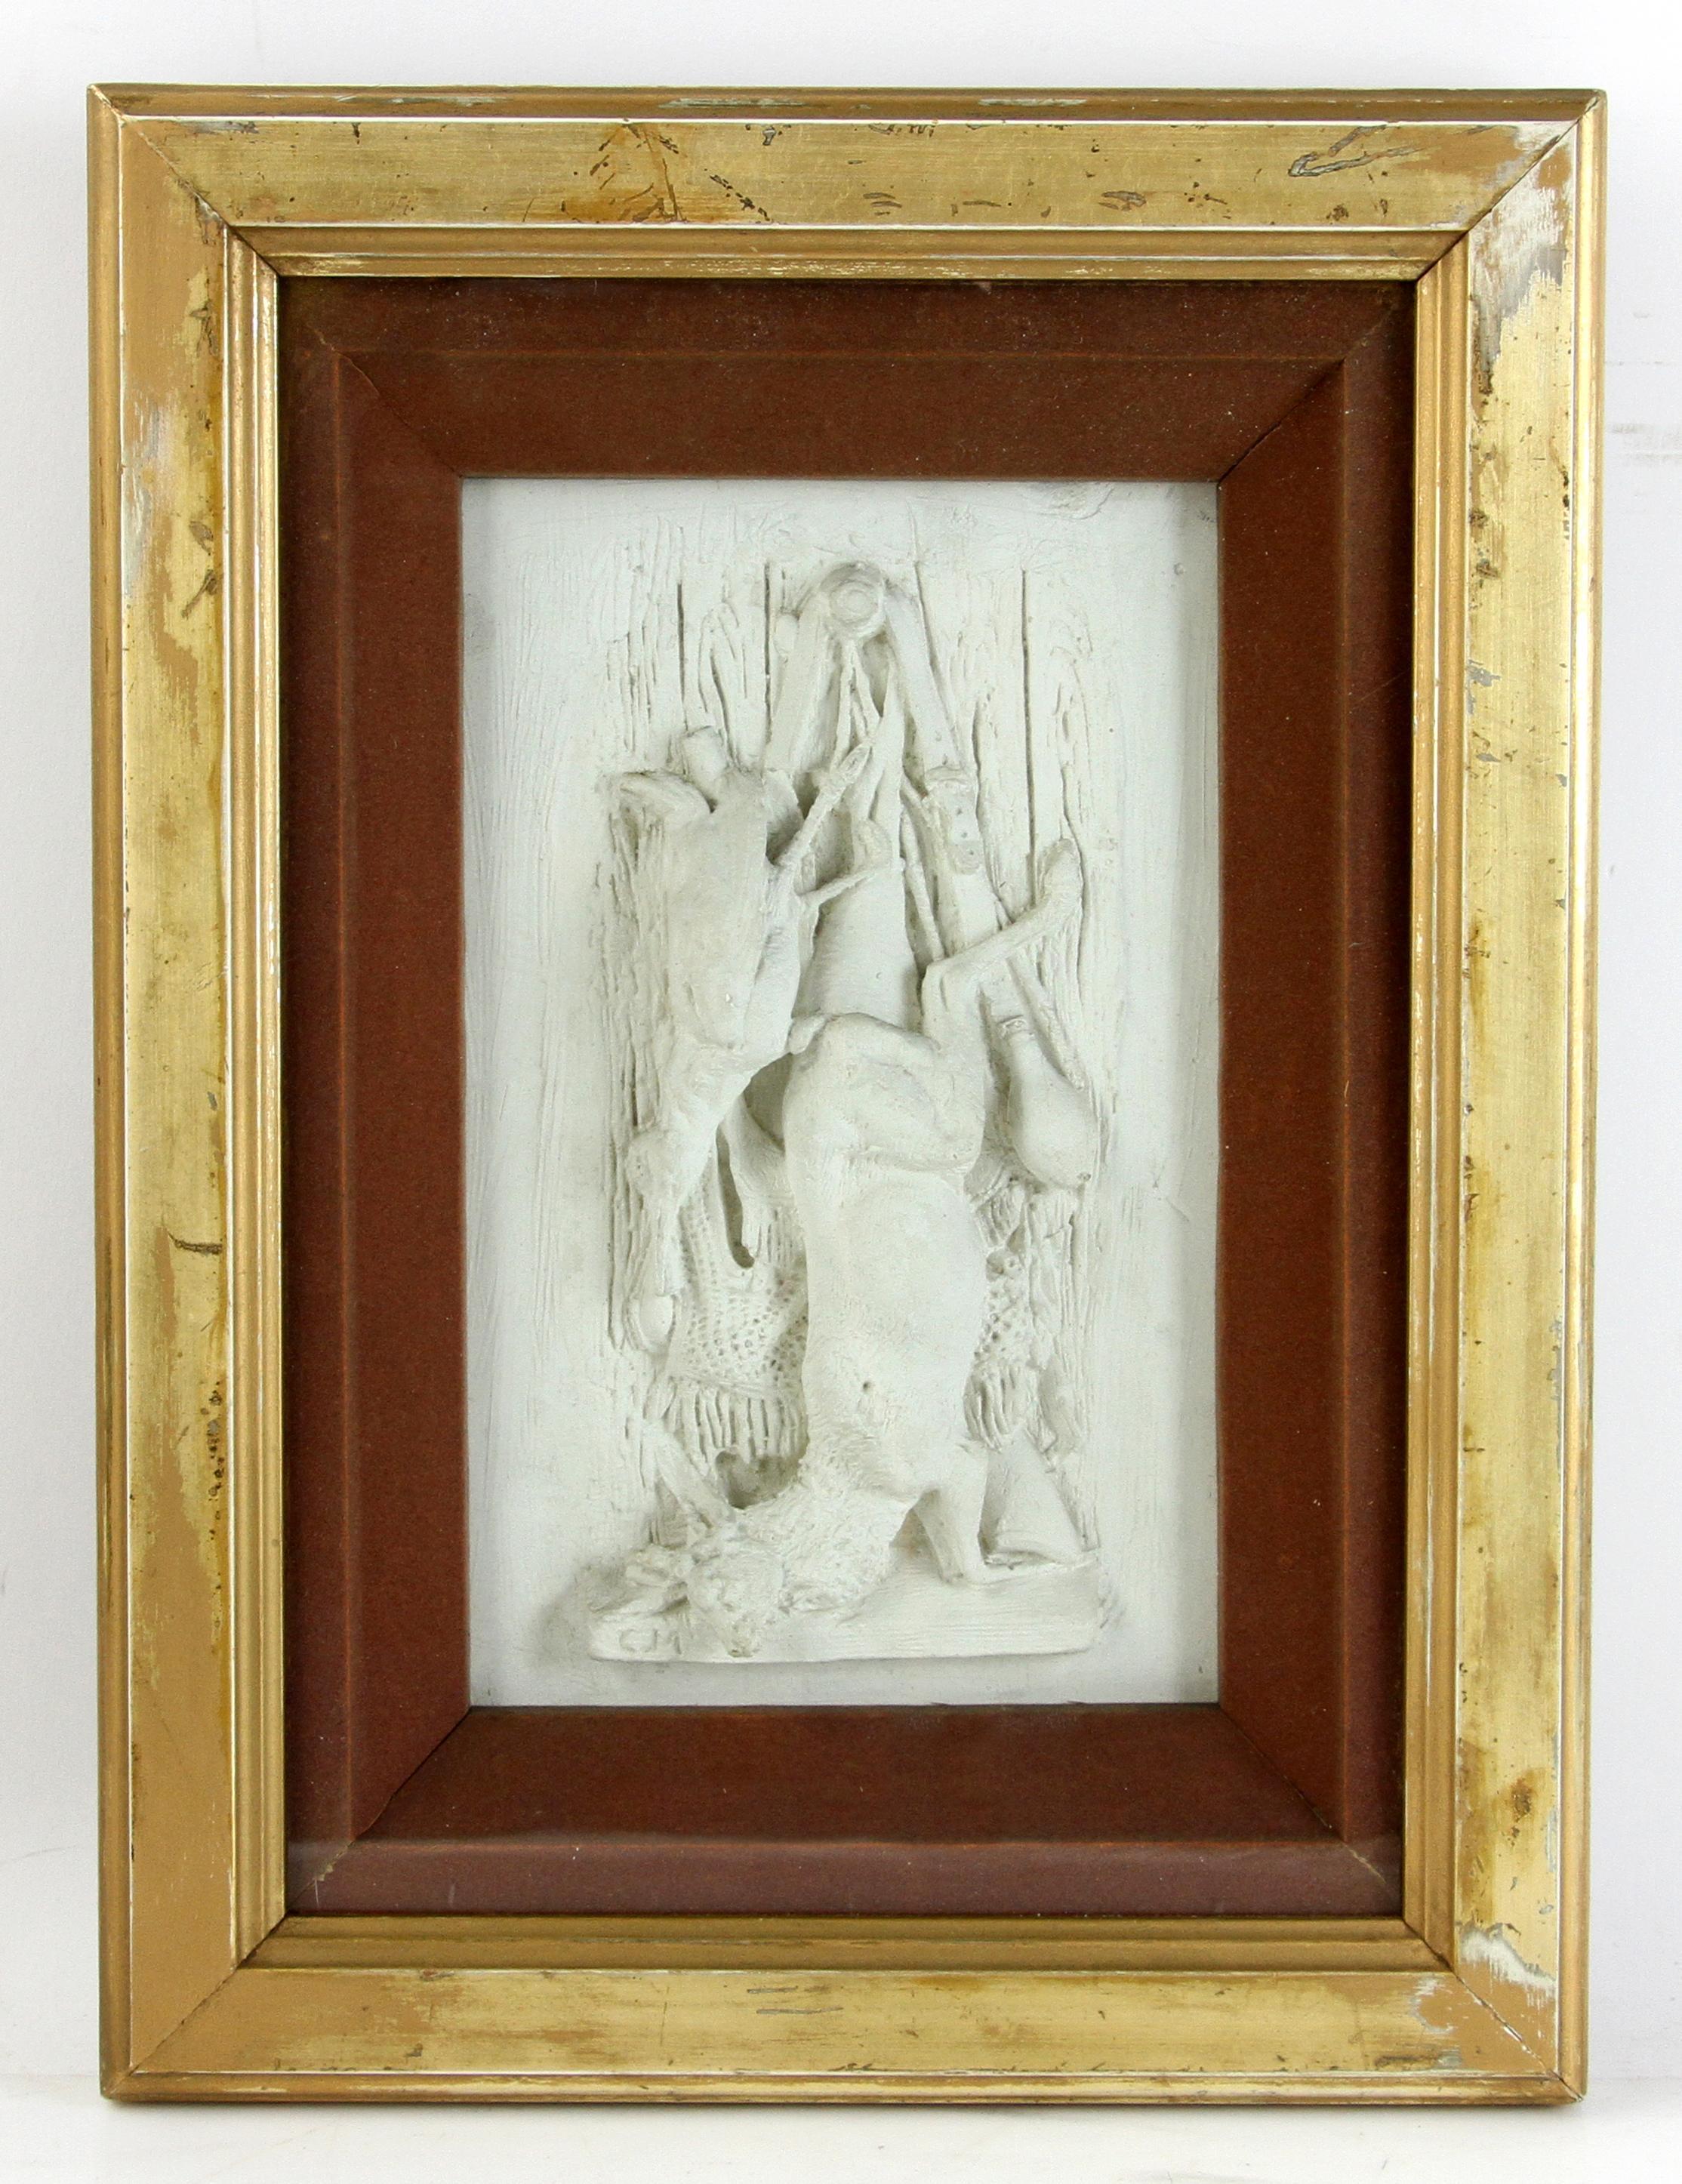 Animal Hunting motif-set of three gilt-framed plaster reliefs depicting wild boar, deer, and hare still life’s in white paster relief in burnt sienna velvet shadow boxes with original glass and gilt frames. All are signed CM by the artist.